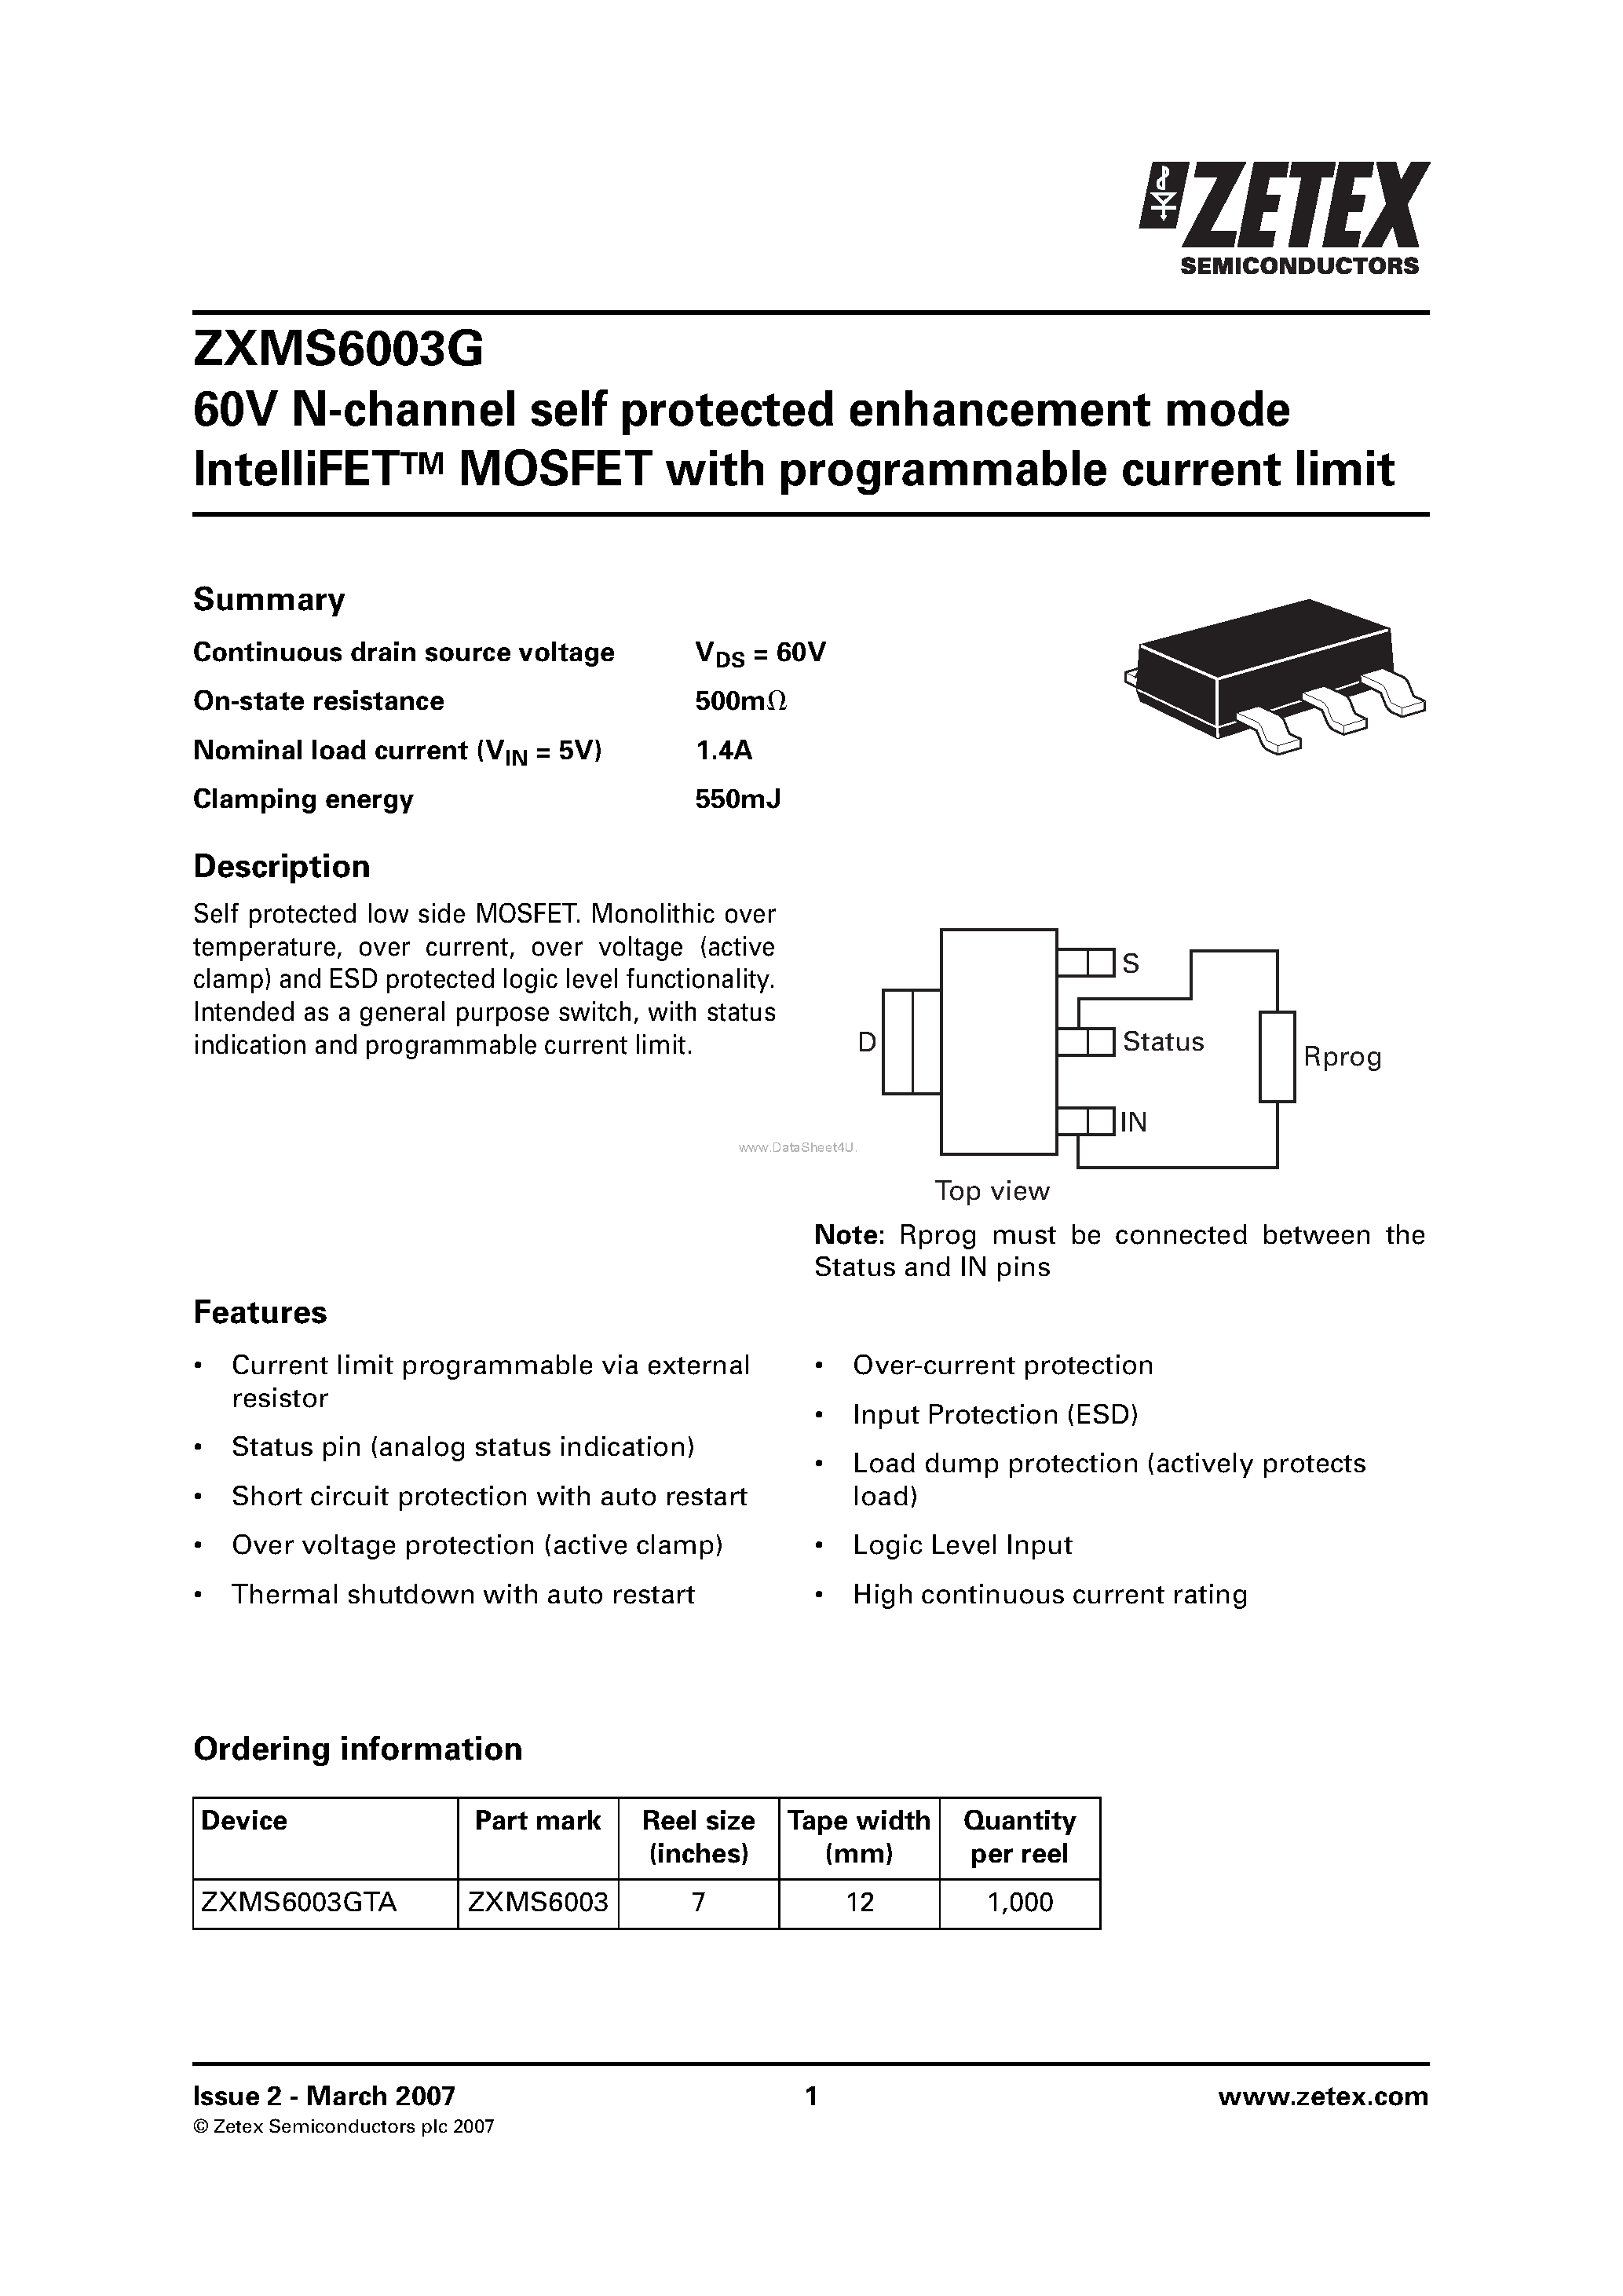 Даташит ZXMS6003G - N-channel self protected enhancement mode IntelliFET MOSFET страница 1